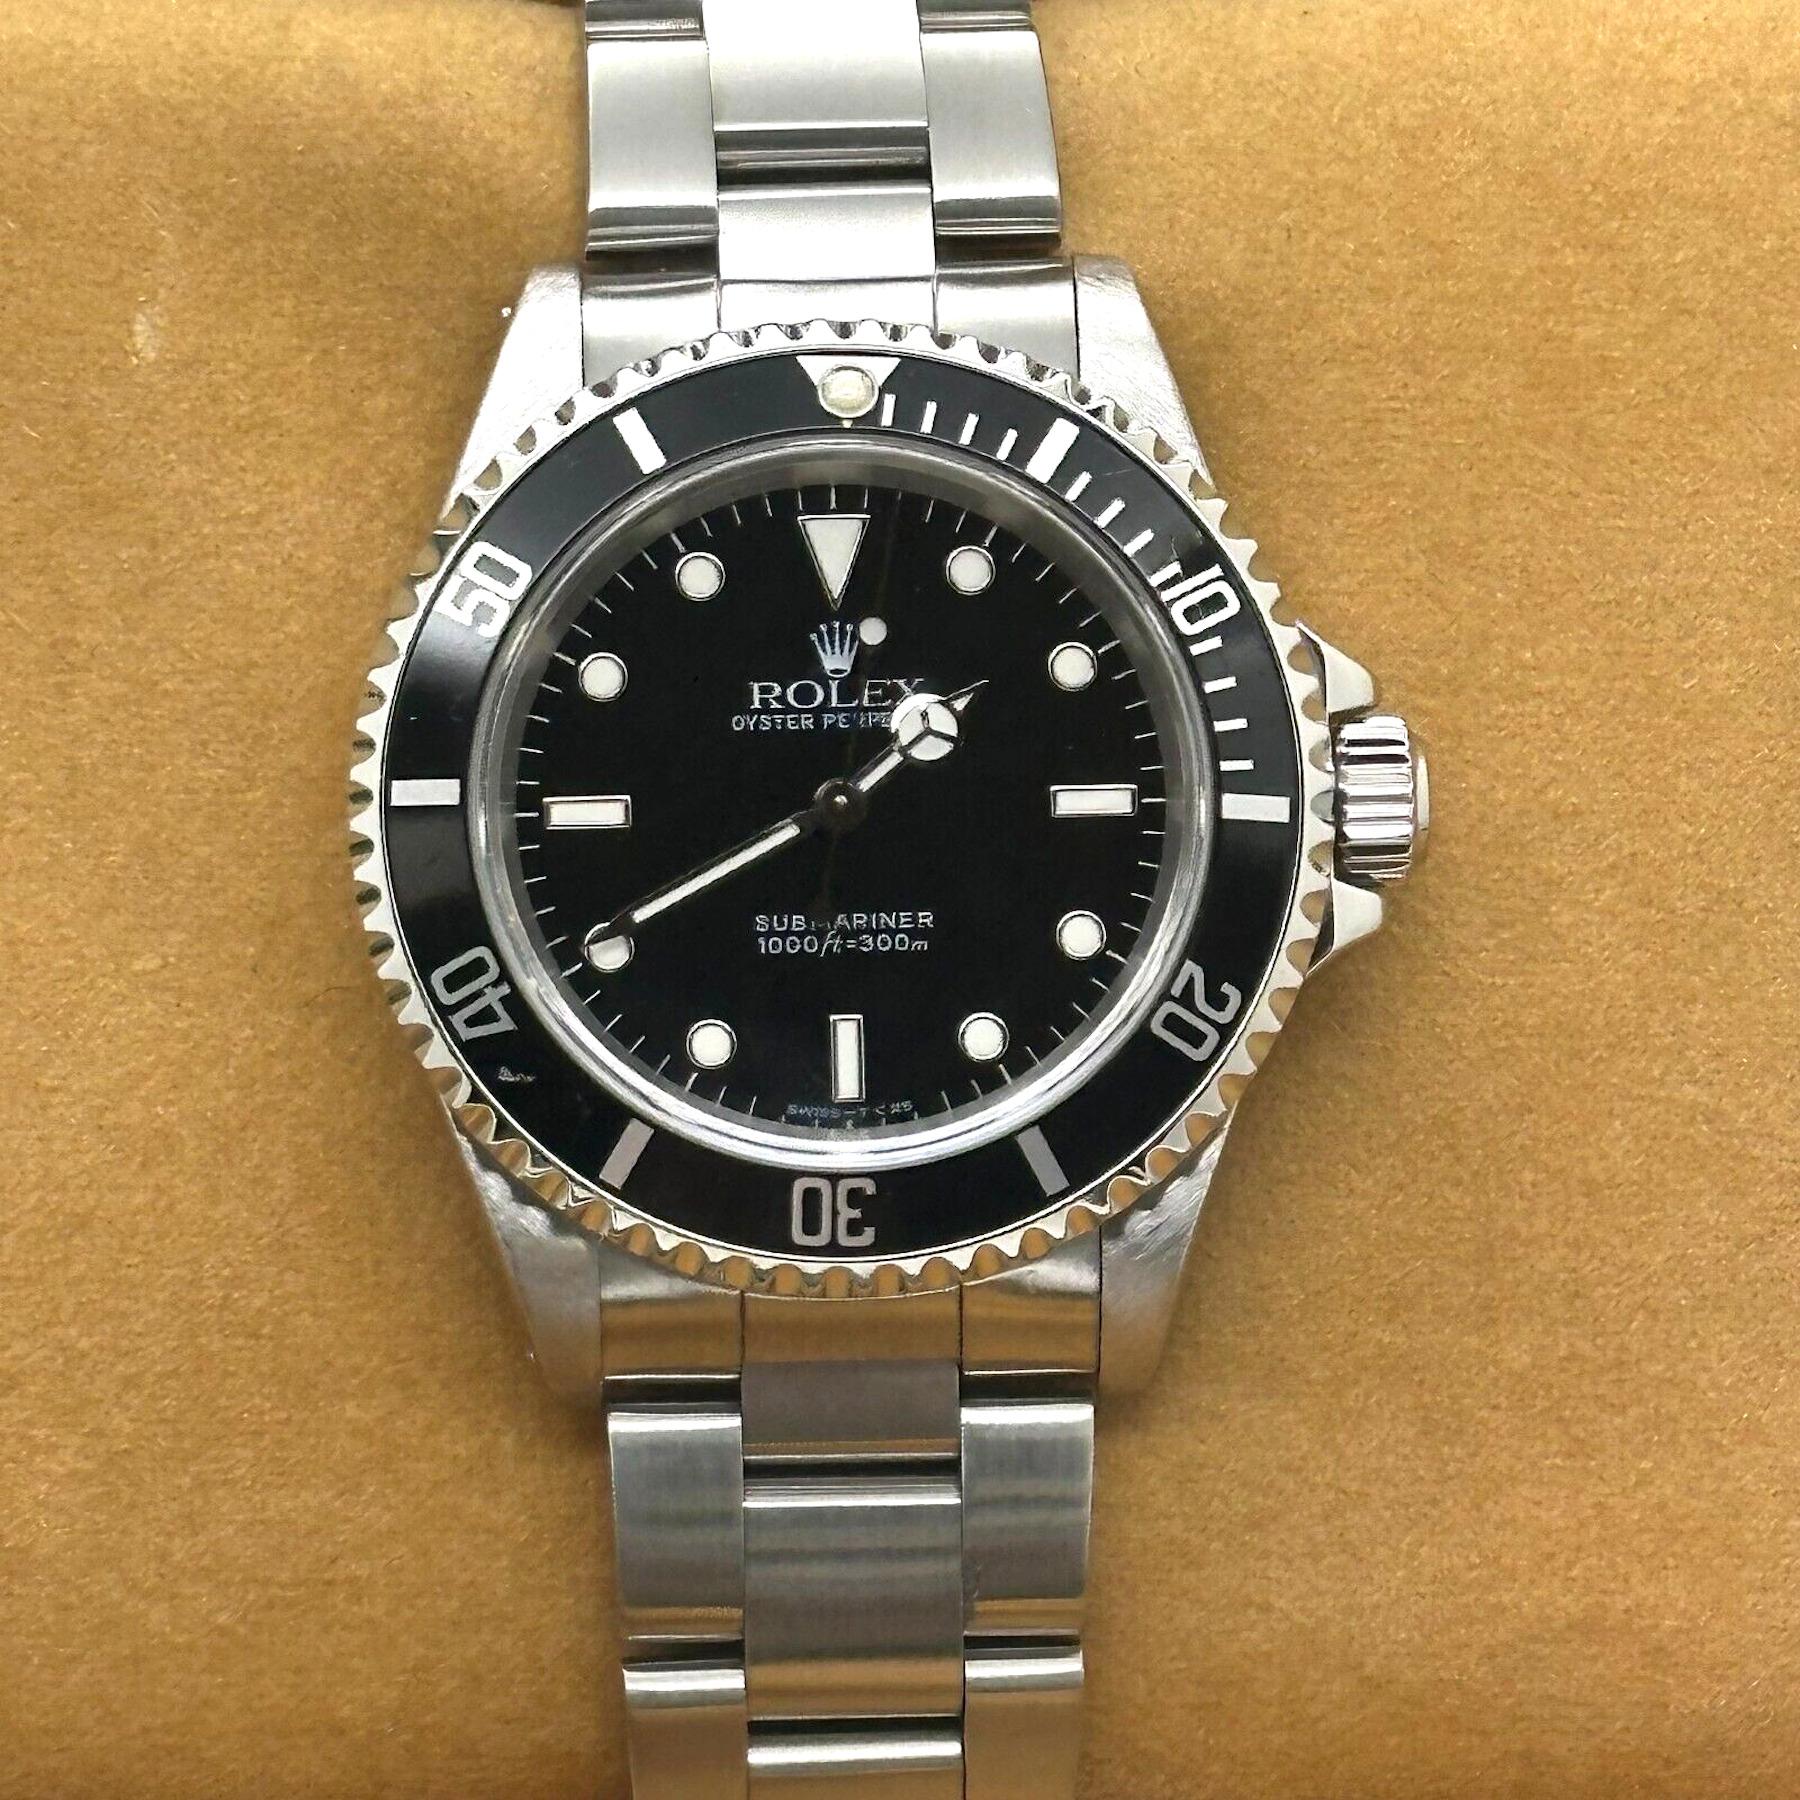 Rolex 14060 Submariner Black Dial Stainless Steel Box 4